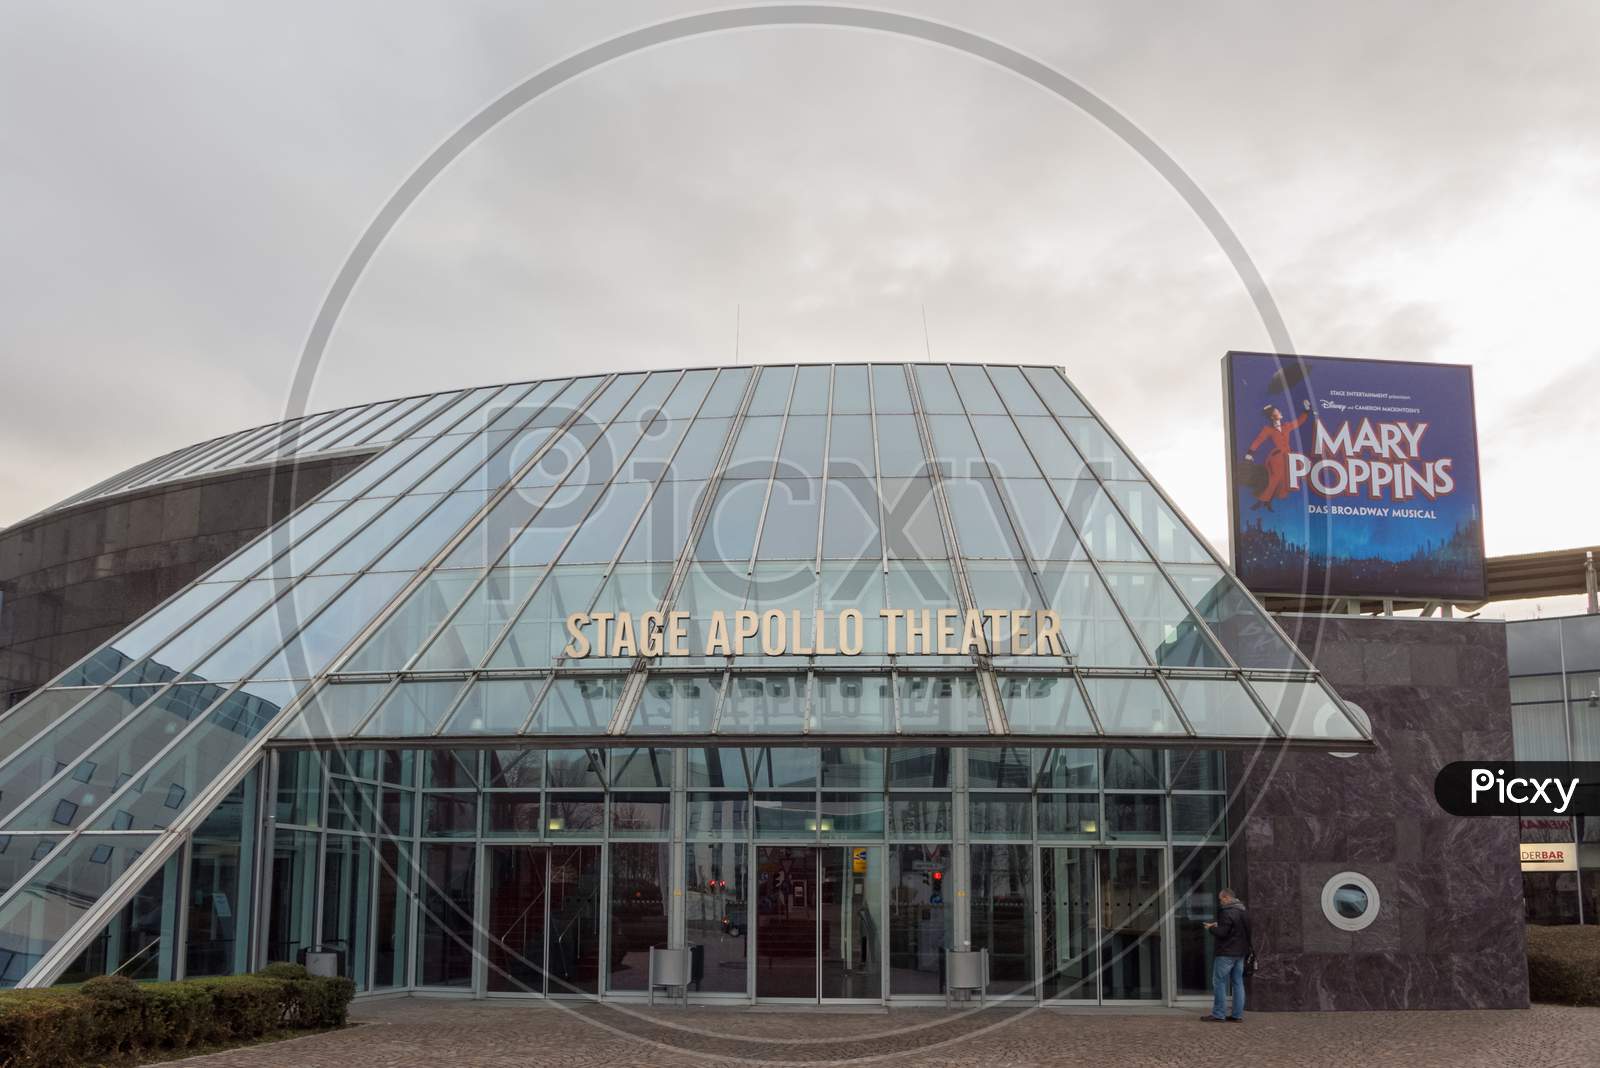 Stuttgart,Germany - January 19,2018: Stage Apollo Theater In This Theatre They Play The Musical Mary Poppins.It'S Part Of The Si-Centrum Entertainment Complex In Moehringen.